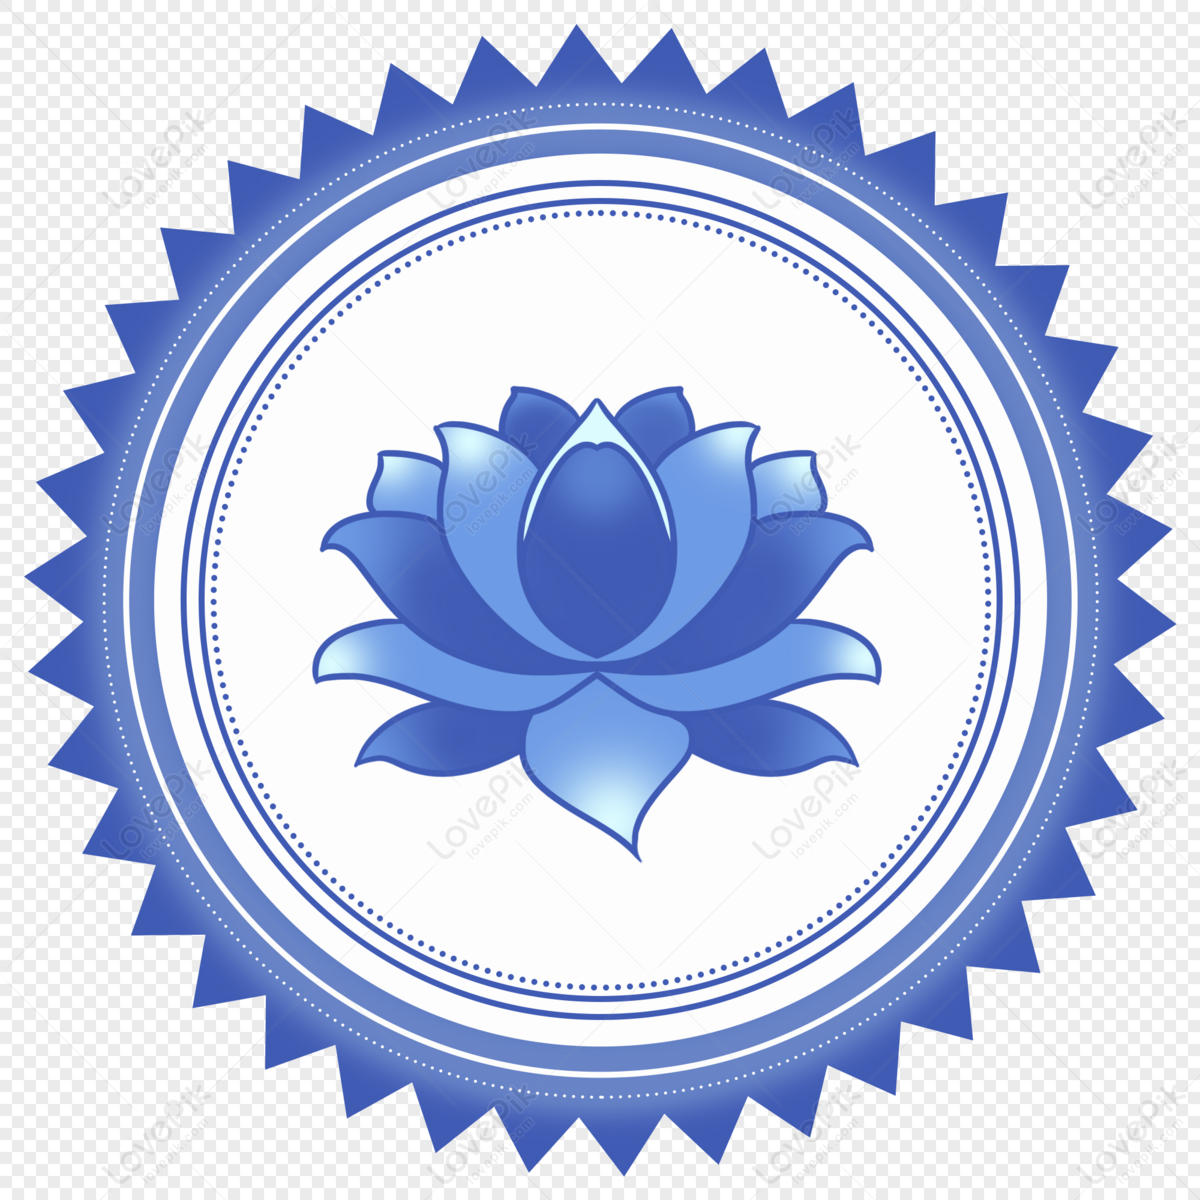 Lotus Clipart Transparent PNG Hd, Lotus Logo Design Icon Vector, Logo  Icons, Lotus Icons, Flower PNG Image For Free Download